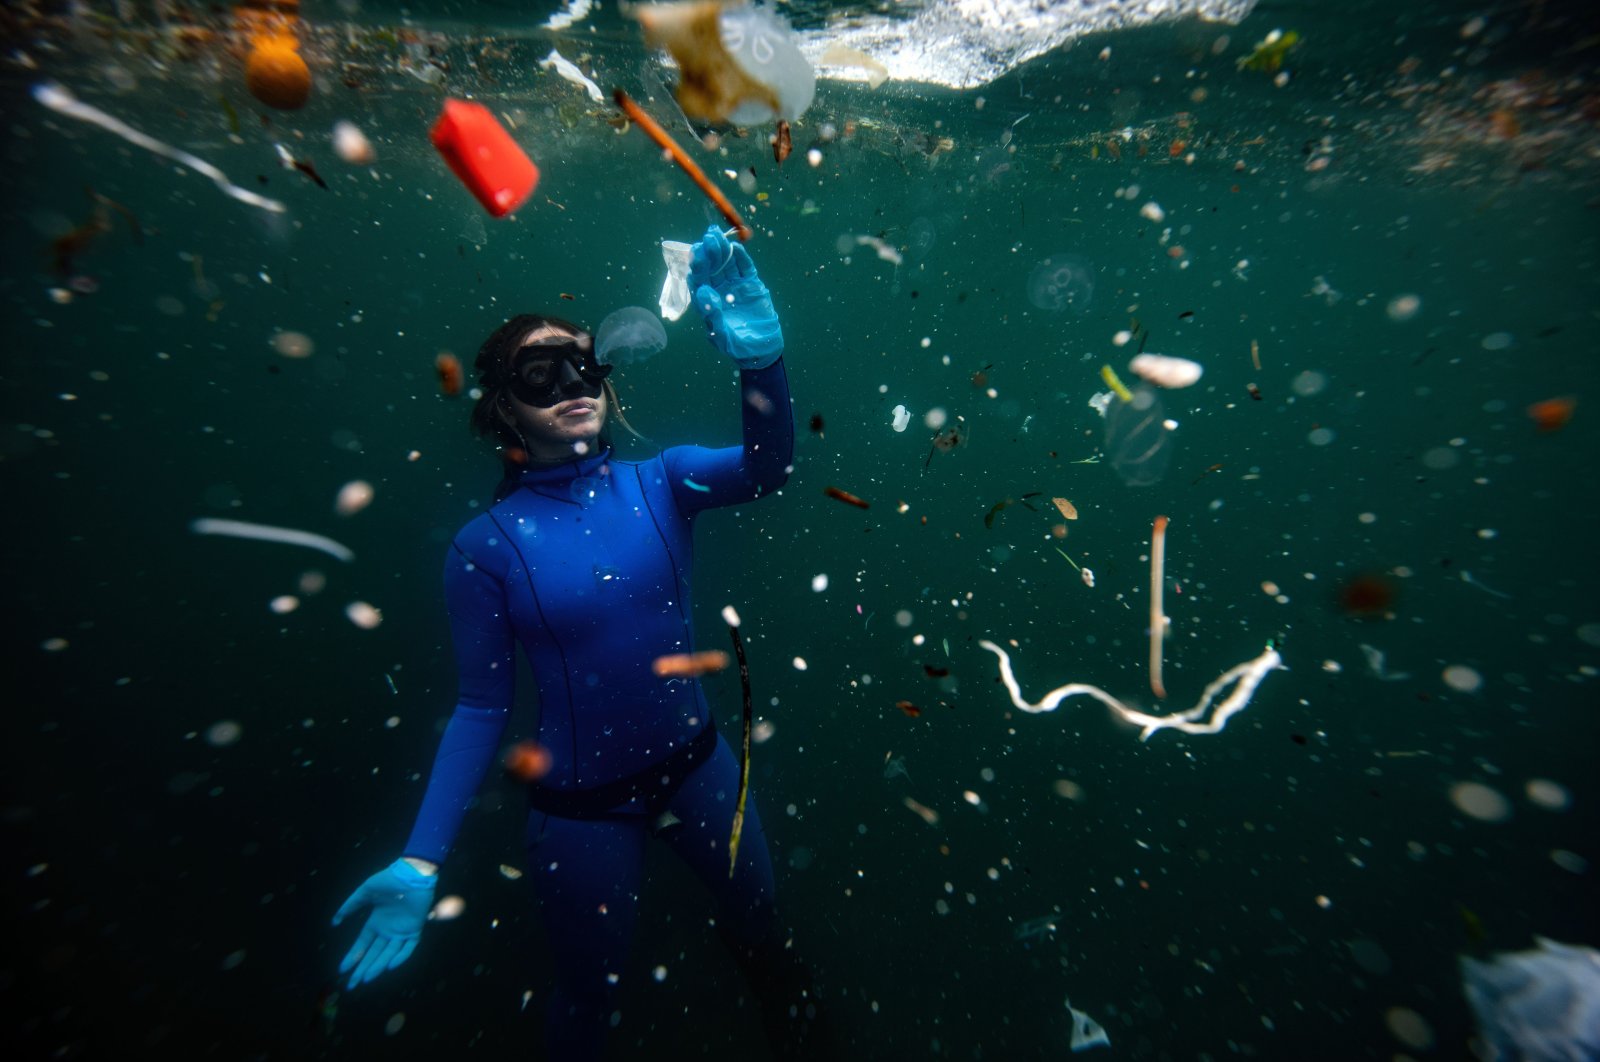 Şahika Ercümen's dive drew attention to the extent of the plastic waste pollution in our waters. (AA Photo)